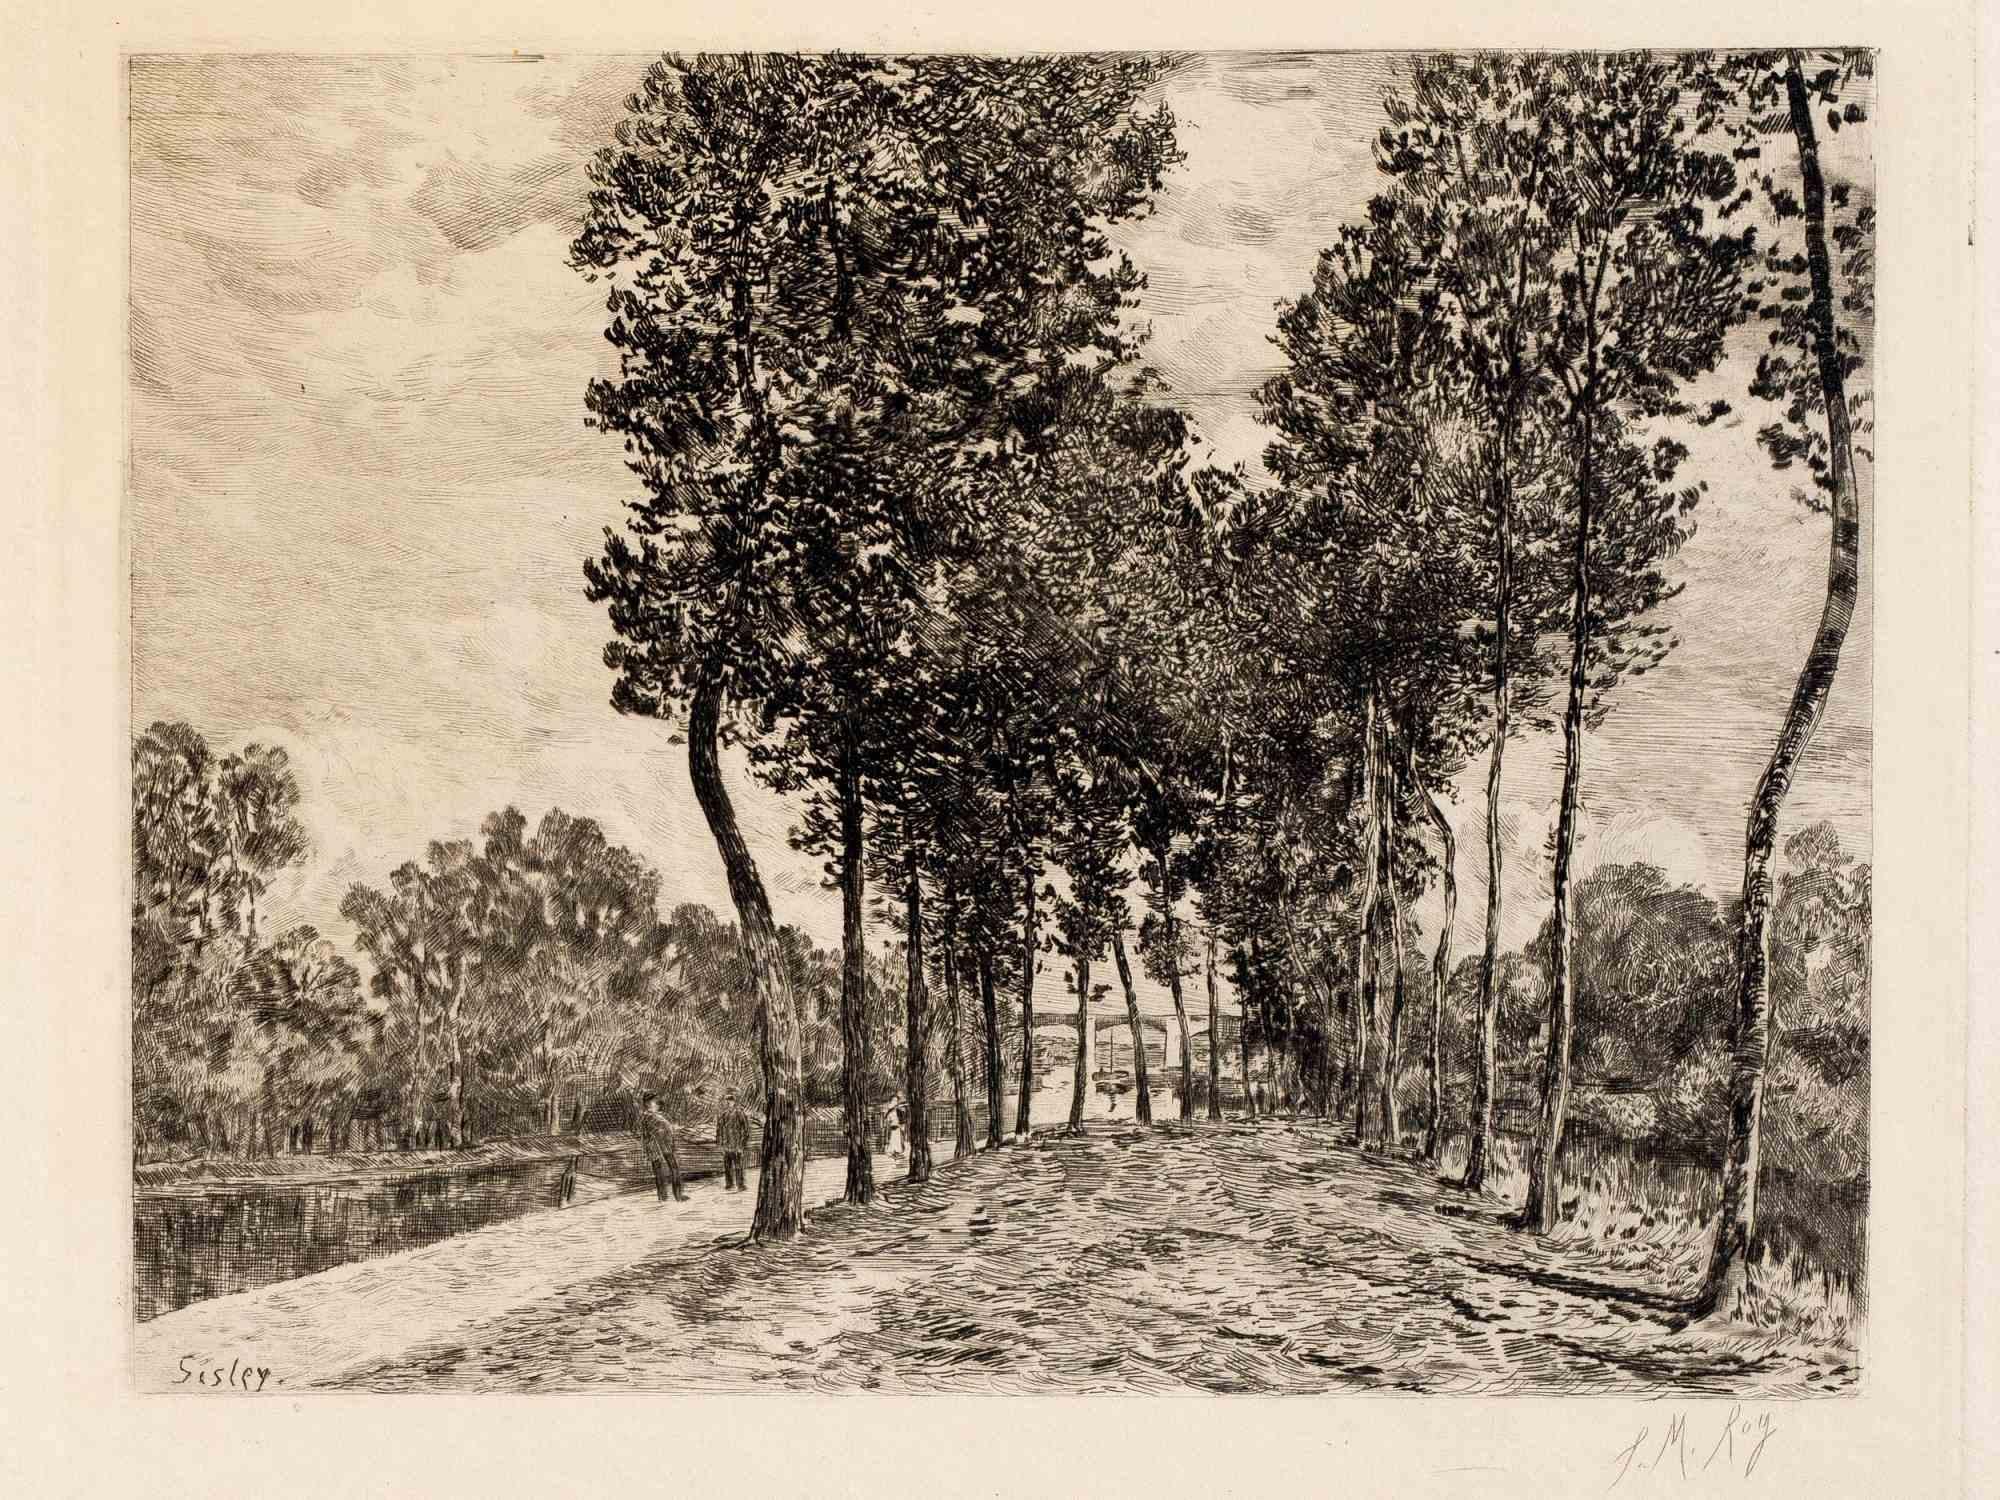   Alfred Sisley Landscape Print - Landscape - Etching after Alfred Sisley - 19th Century